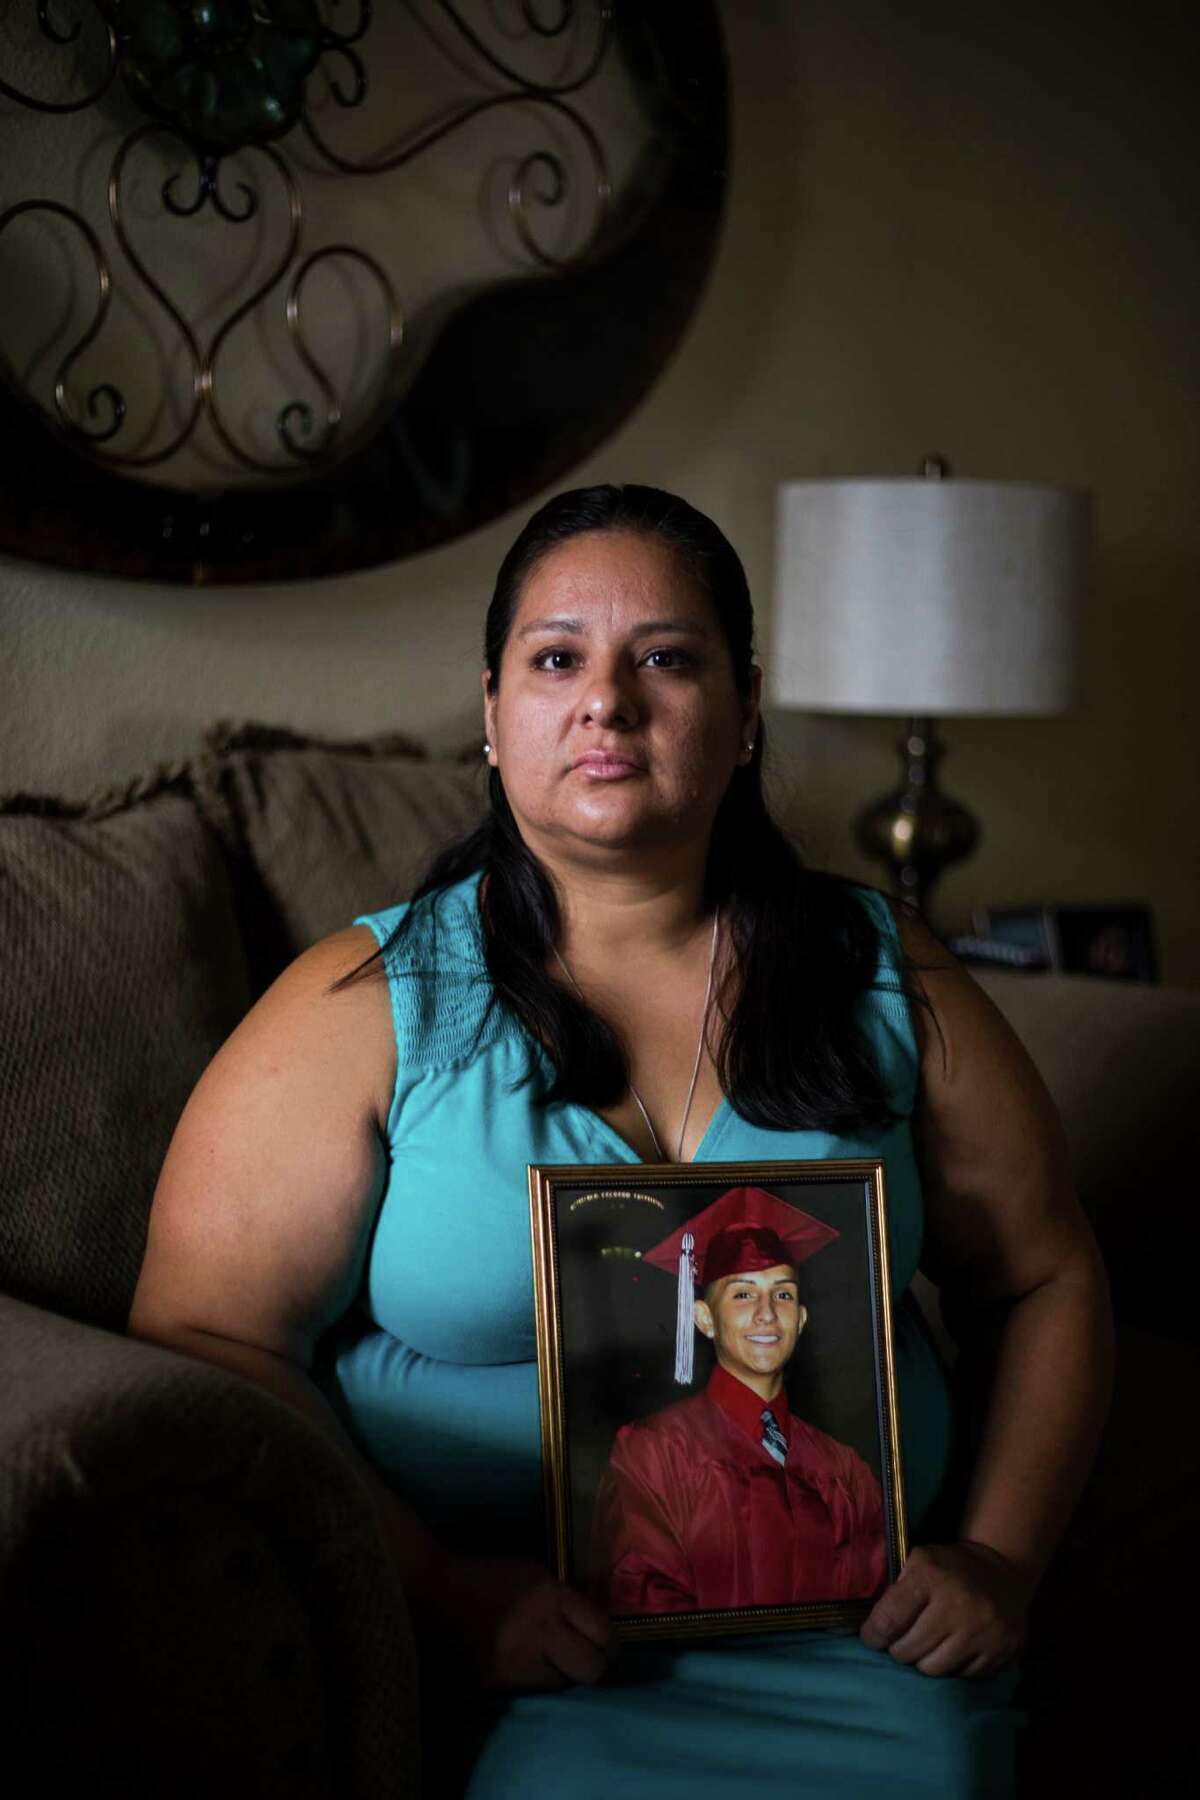 Debra De La Garza holds her son's graduation image at her home in San Antonio, on Tuesday, July 19, 2016. Garza lost her 19-year-old son, Manuel Carvajal, to a drug overdose last year and is now planning a memorial service, set for late August, in addition to being active in overdose recognition in San Antonio.